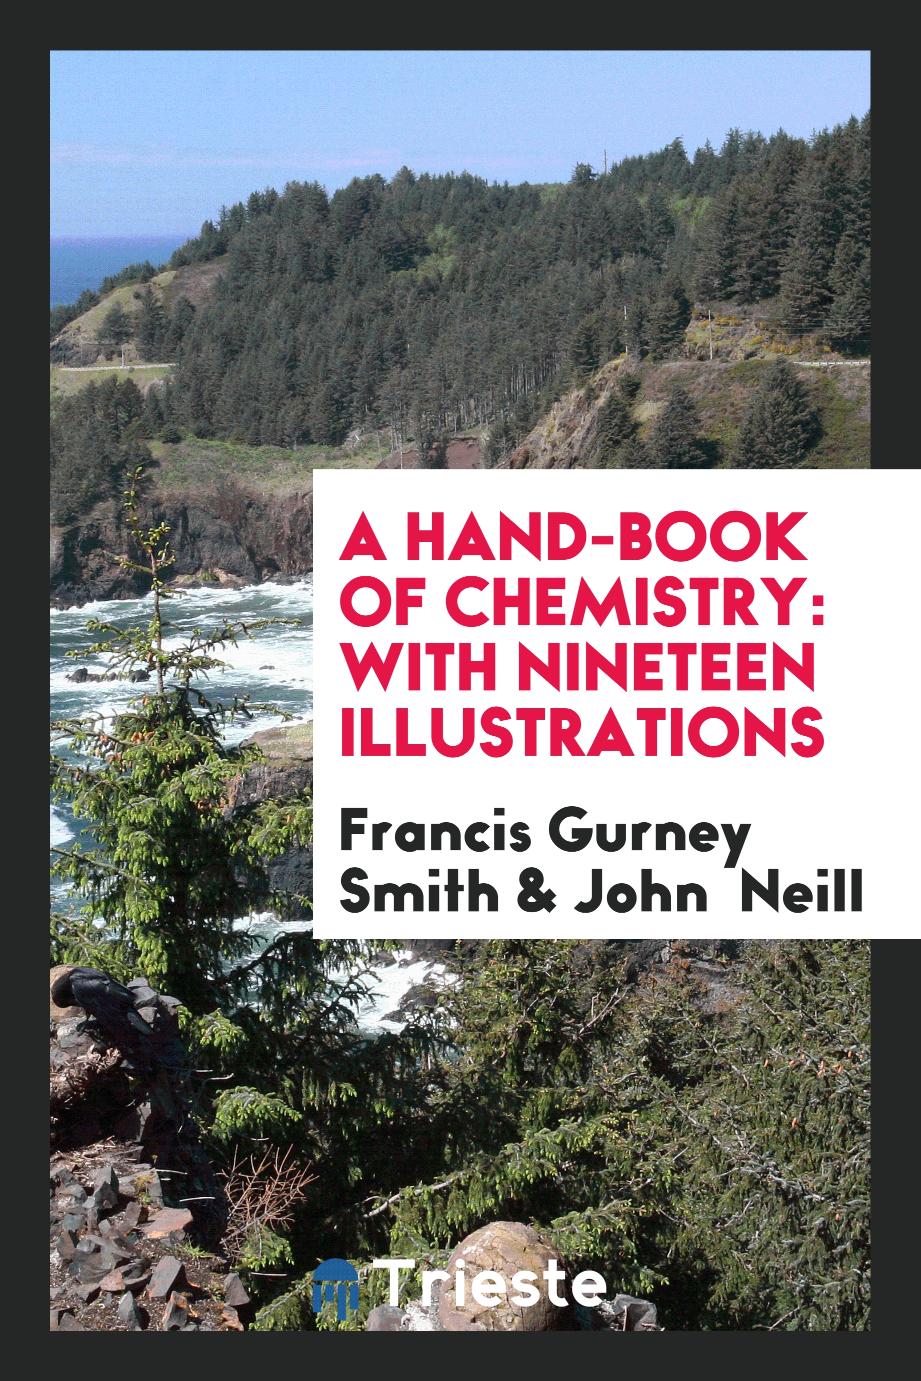 A Hand-Book of Chemistry: With Nineteen Illustrations